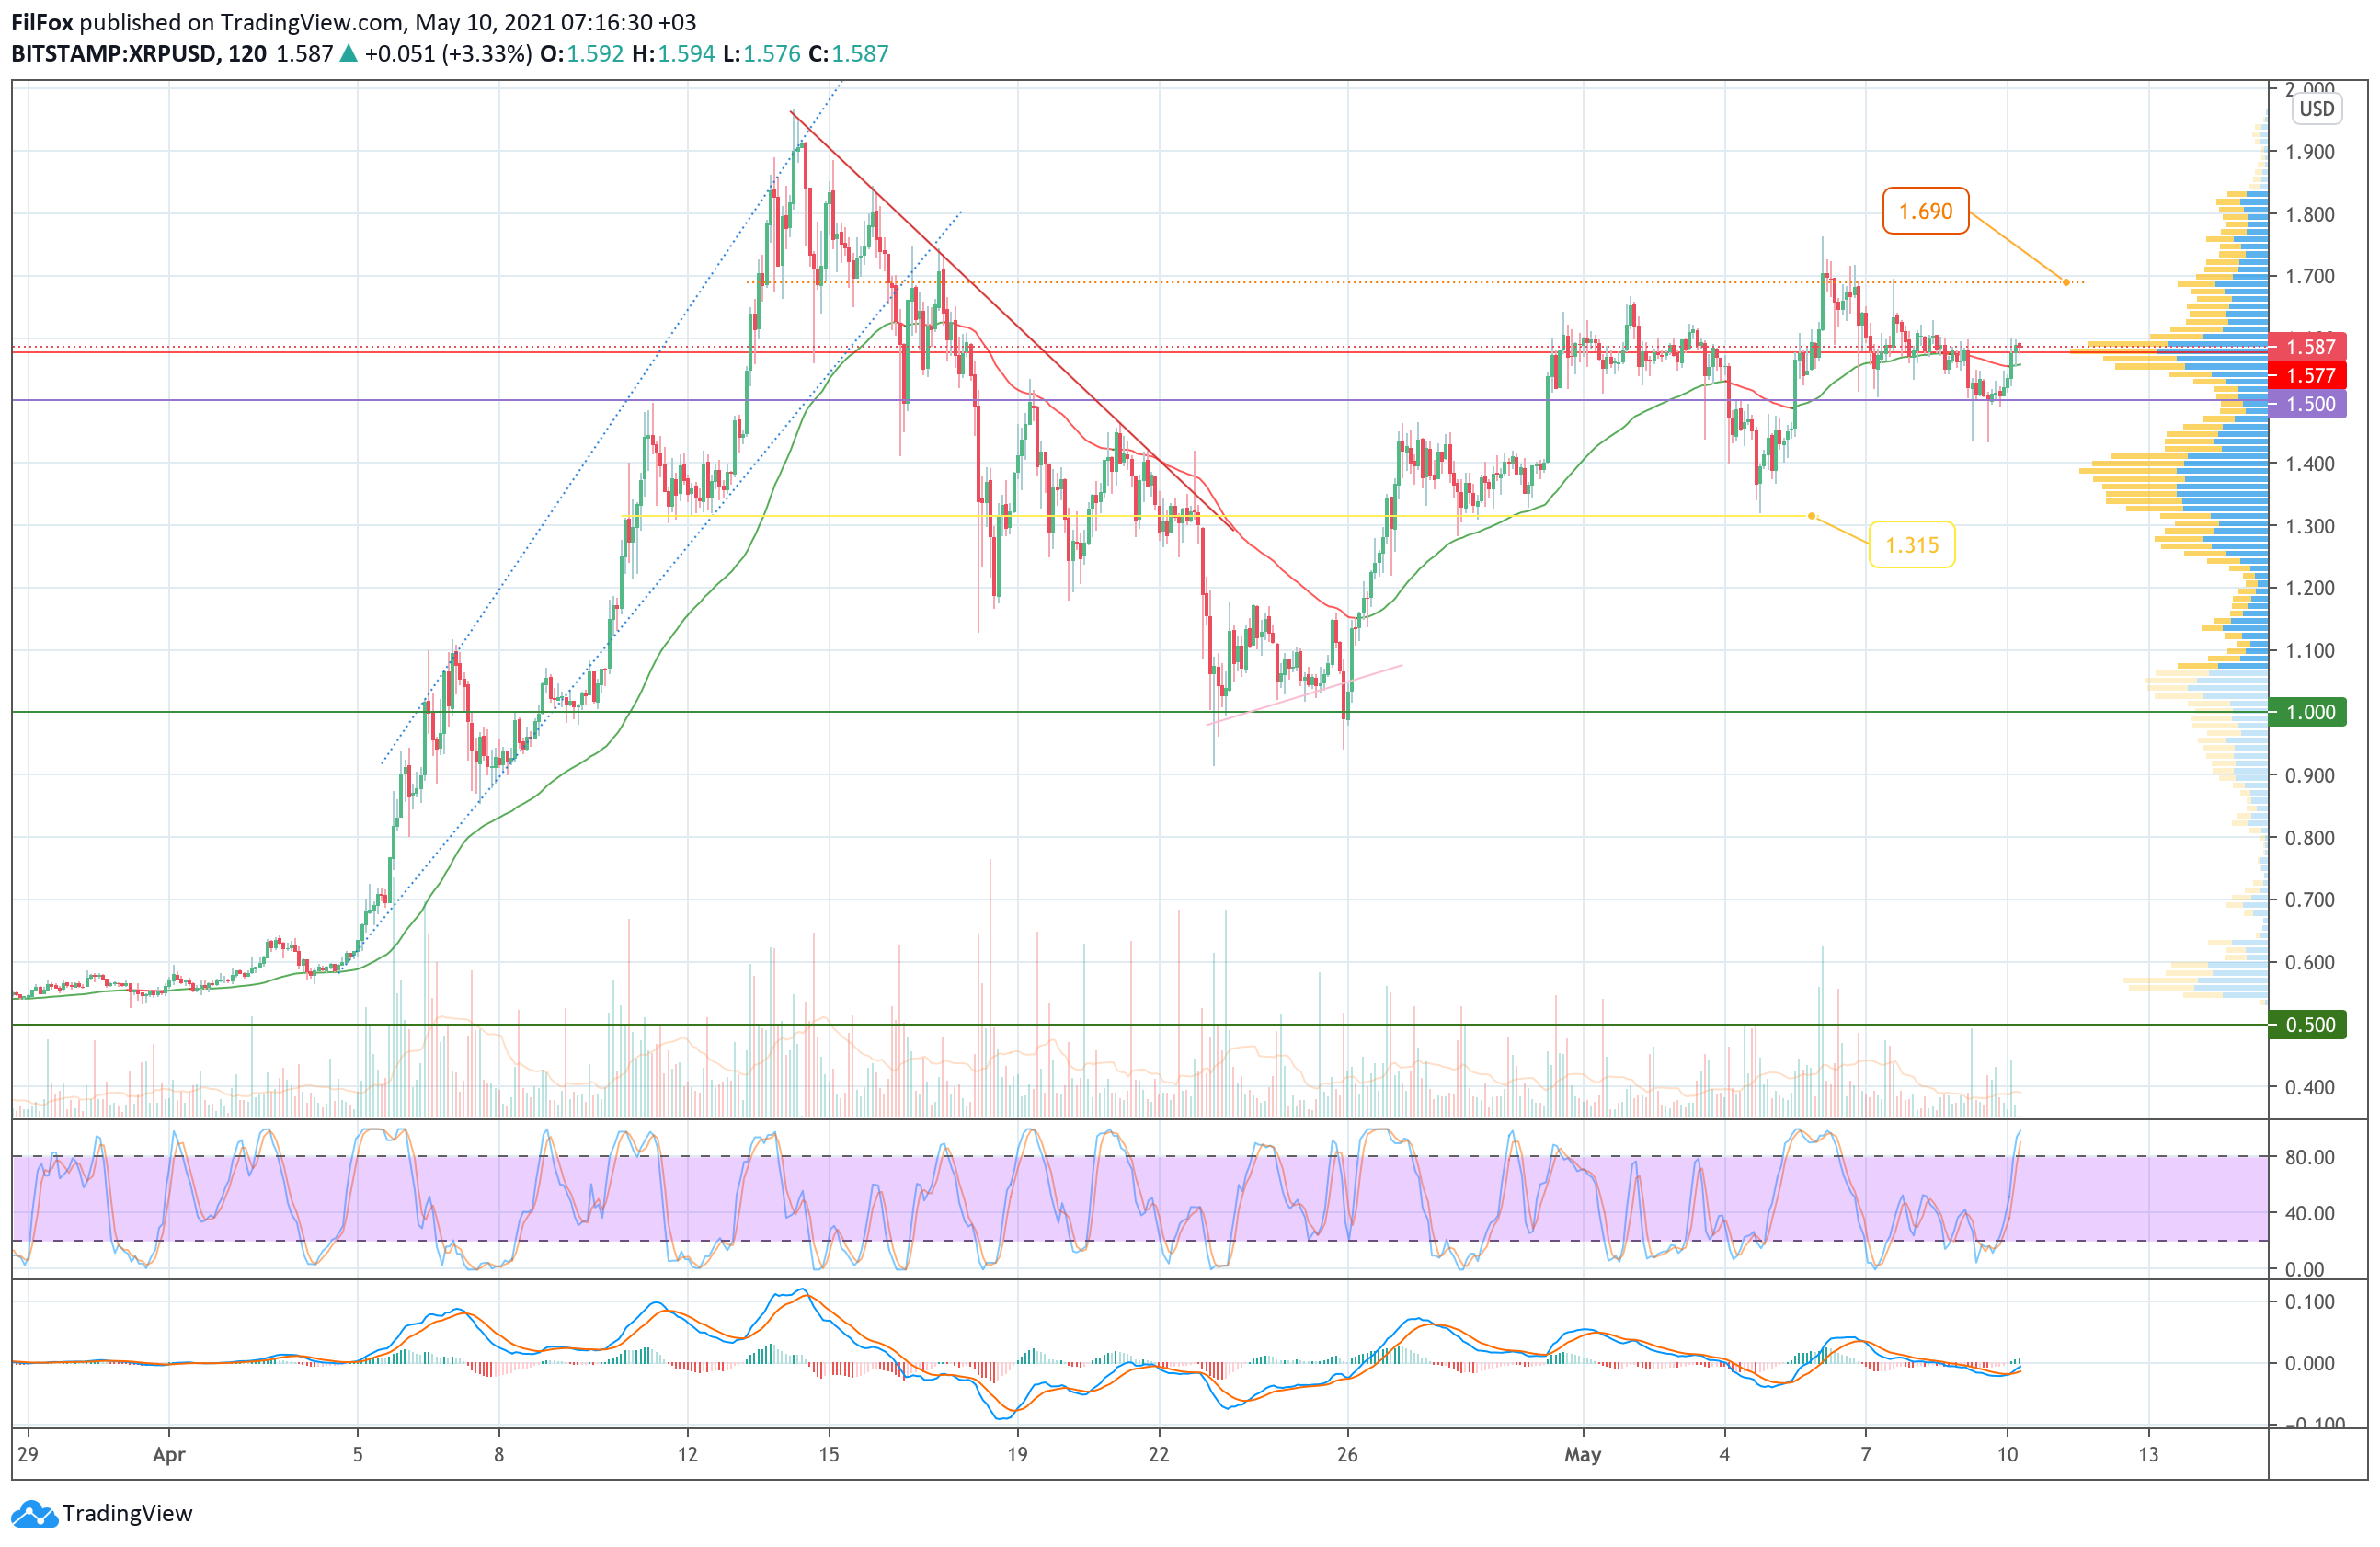 Analysis of the prices of Bitcoin, Ethereum, XRP for 05/10/2021